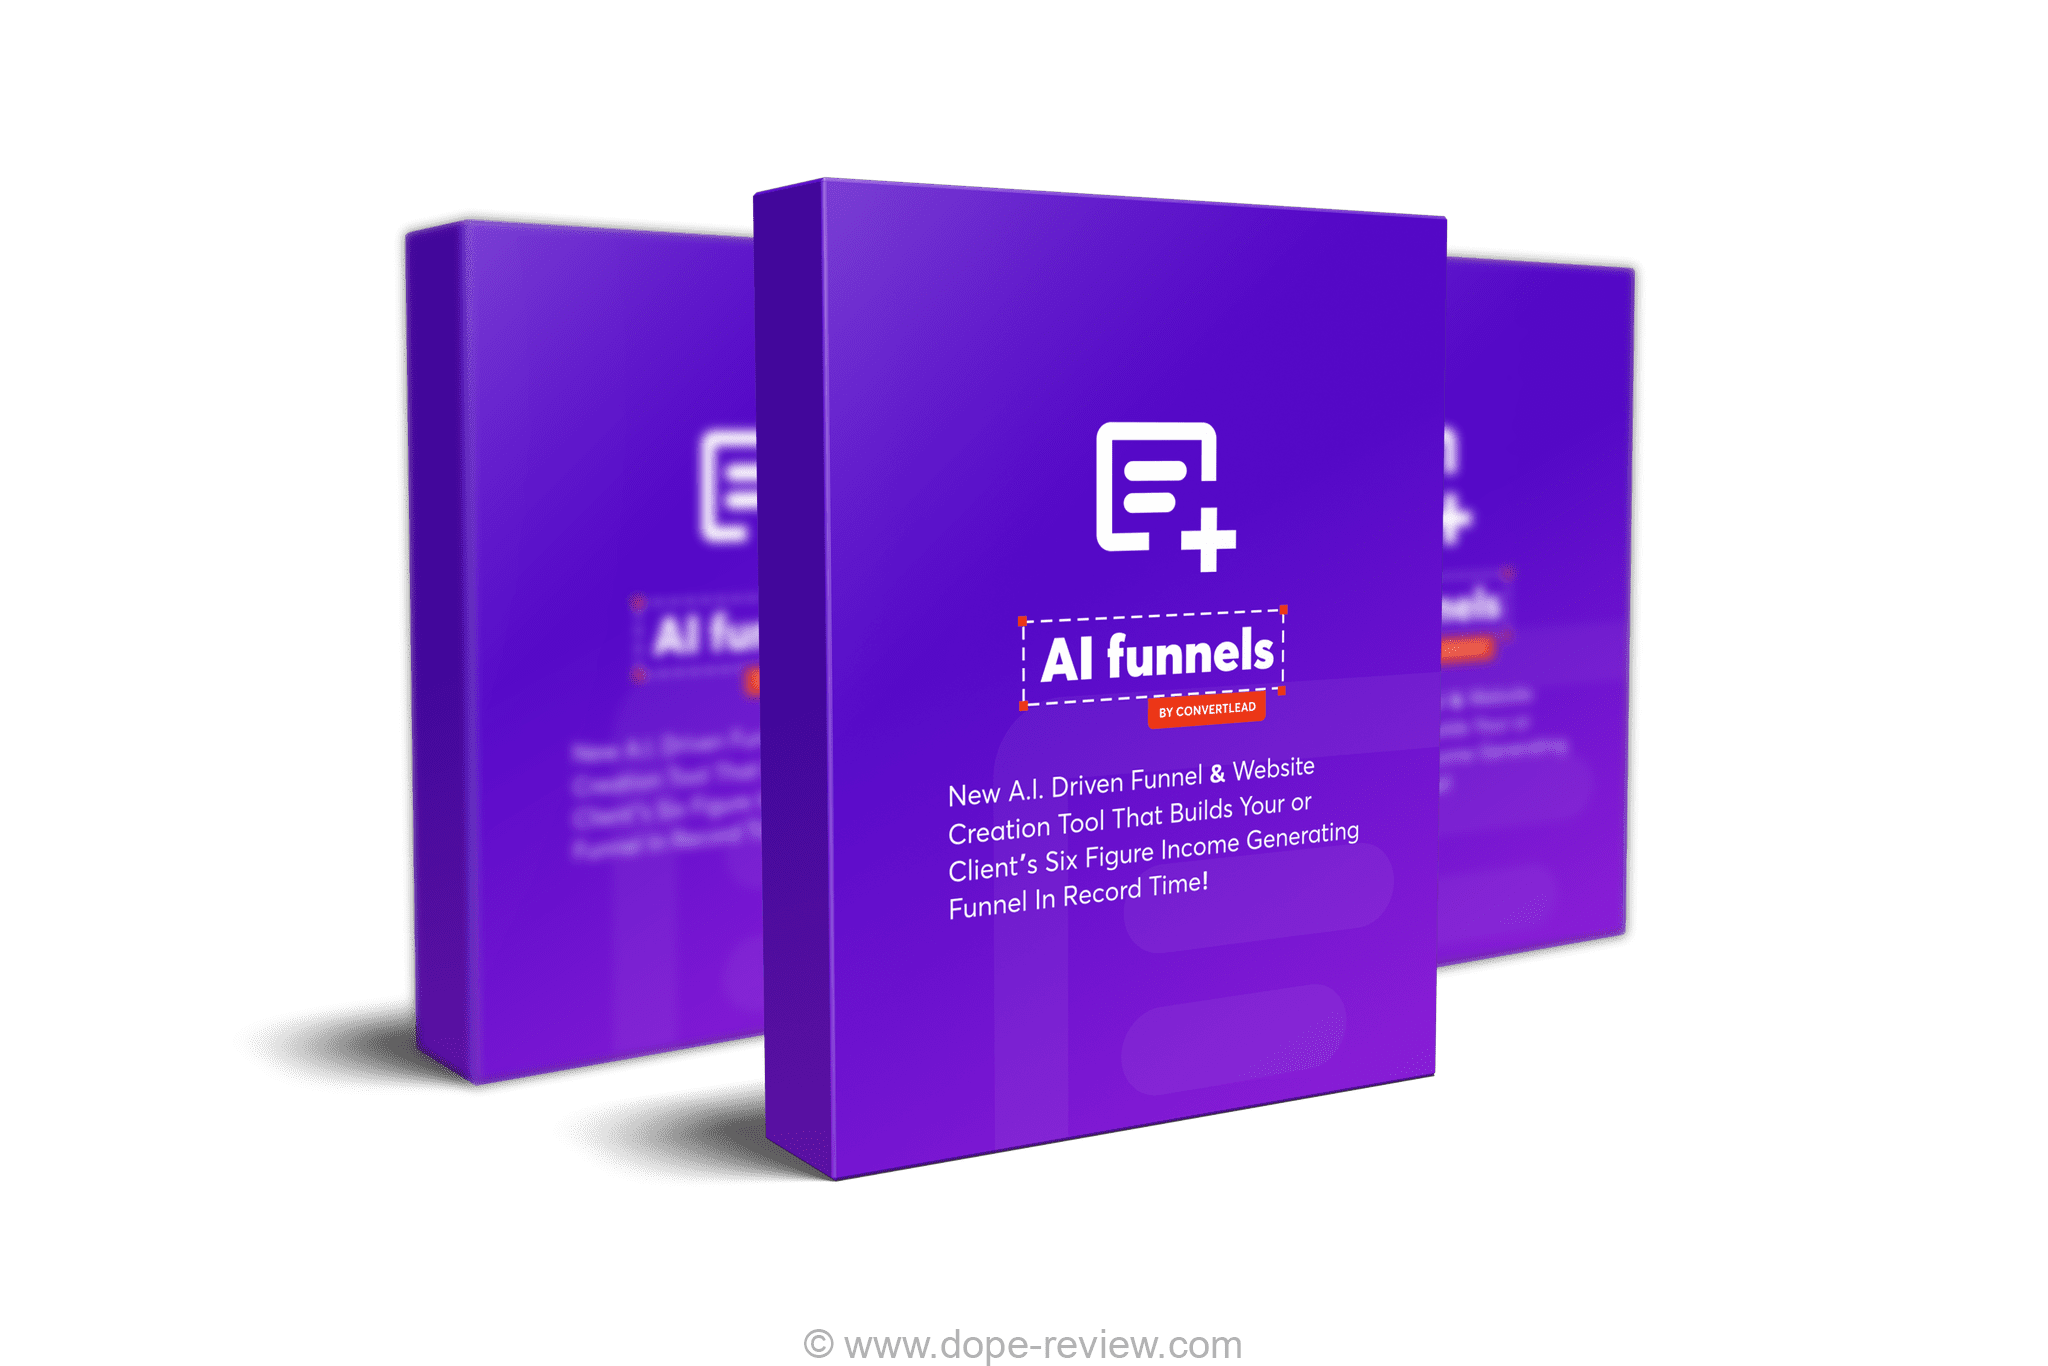 A.I Funnels Review